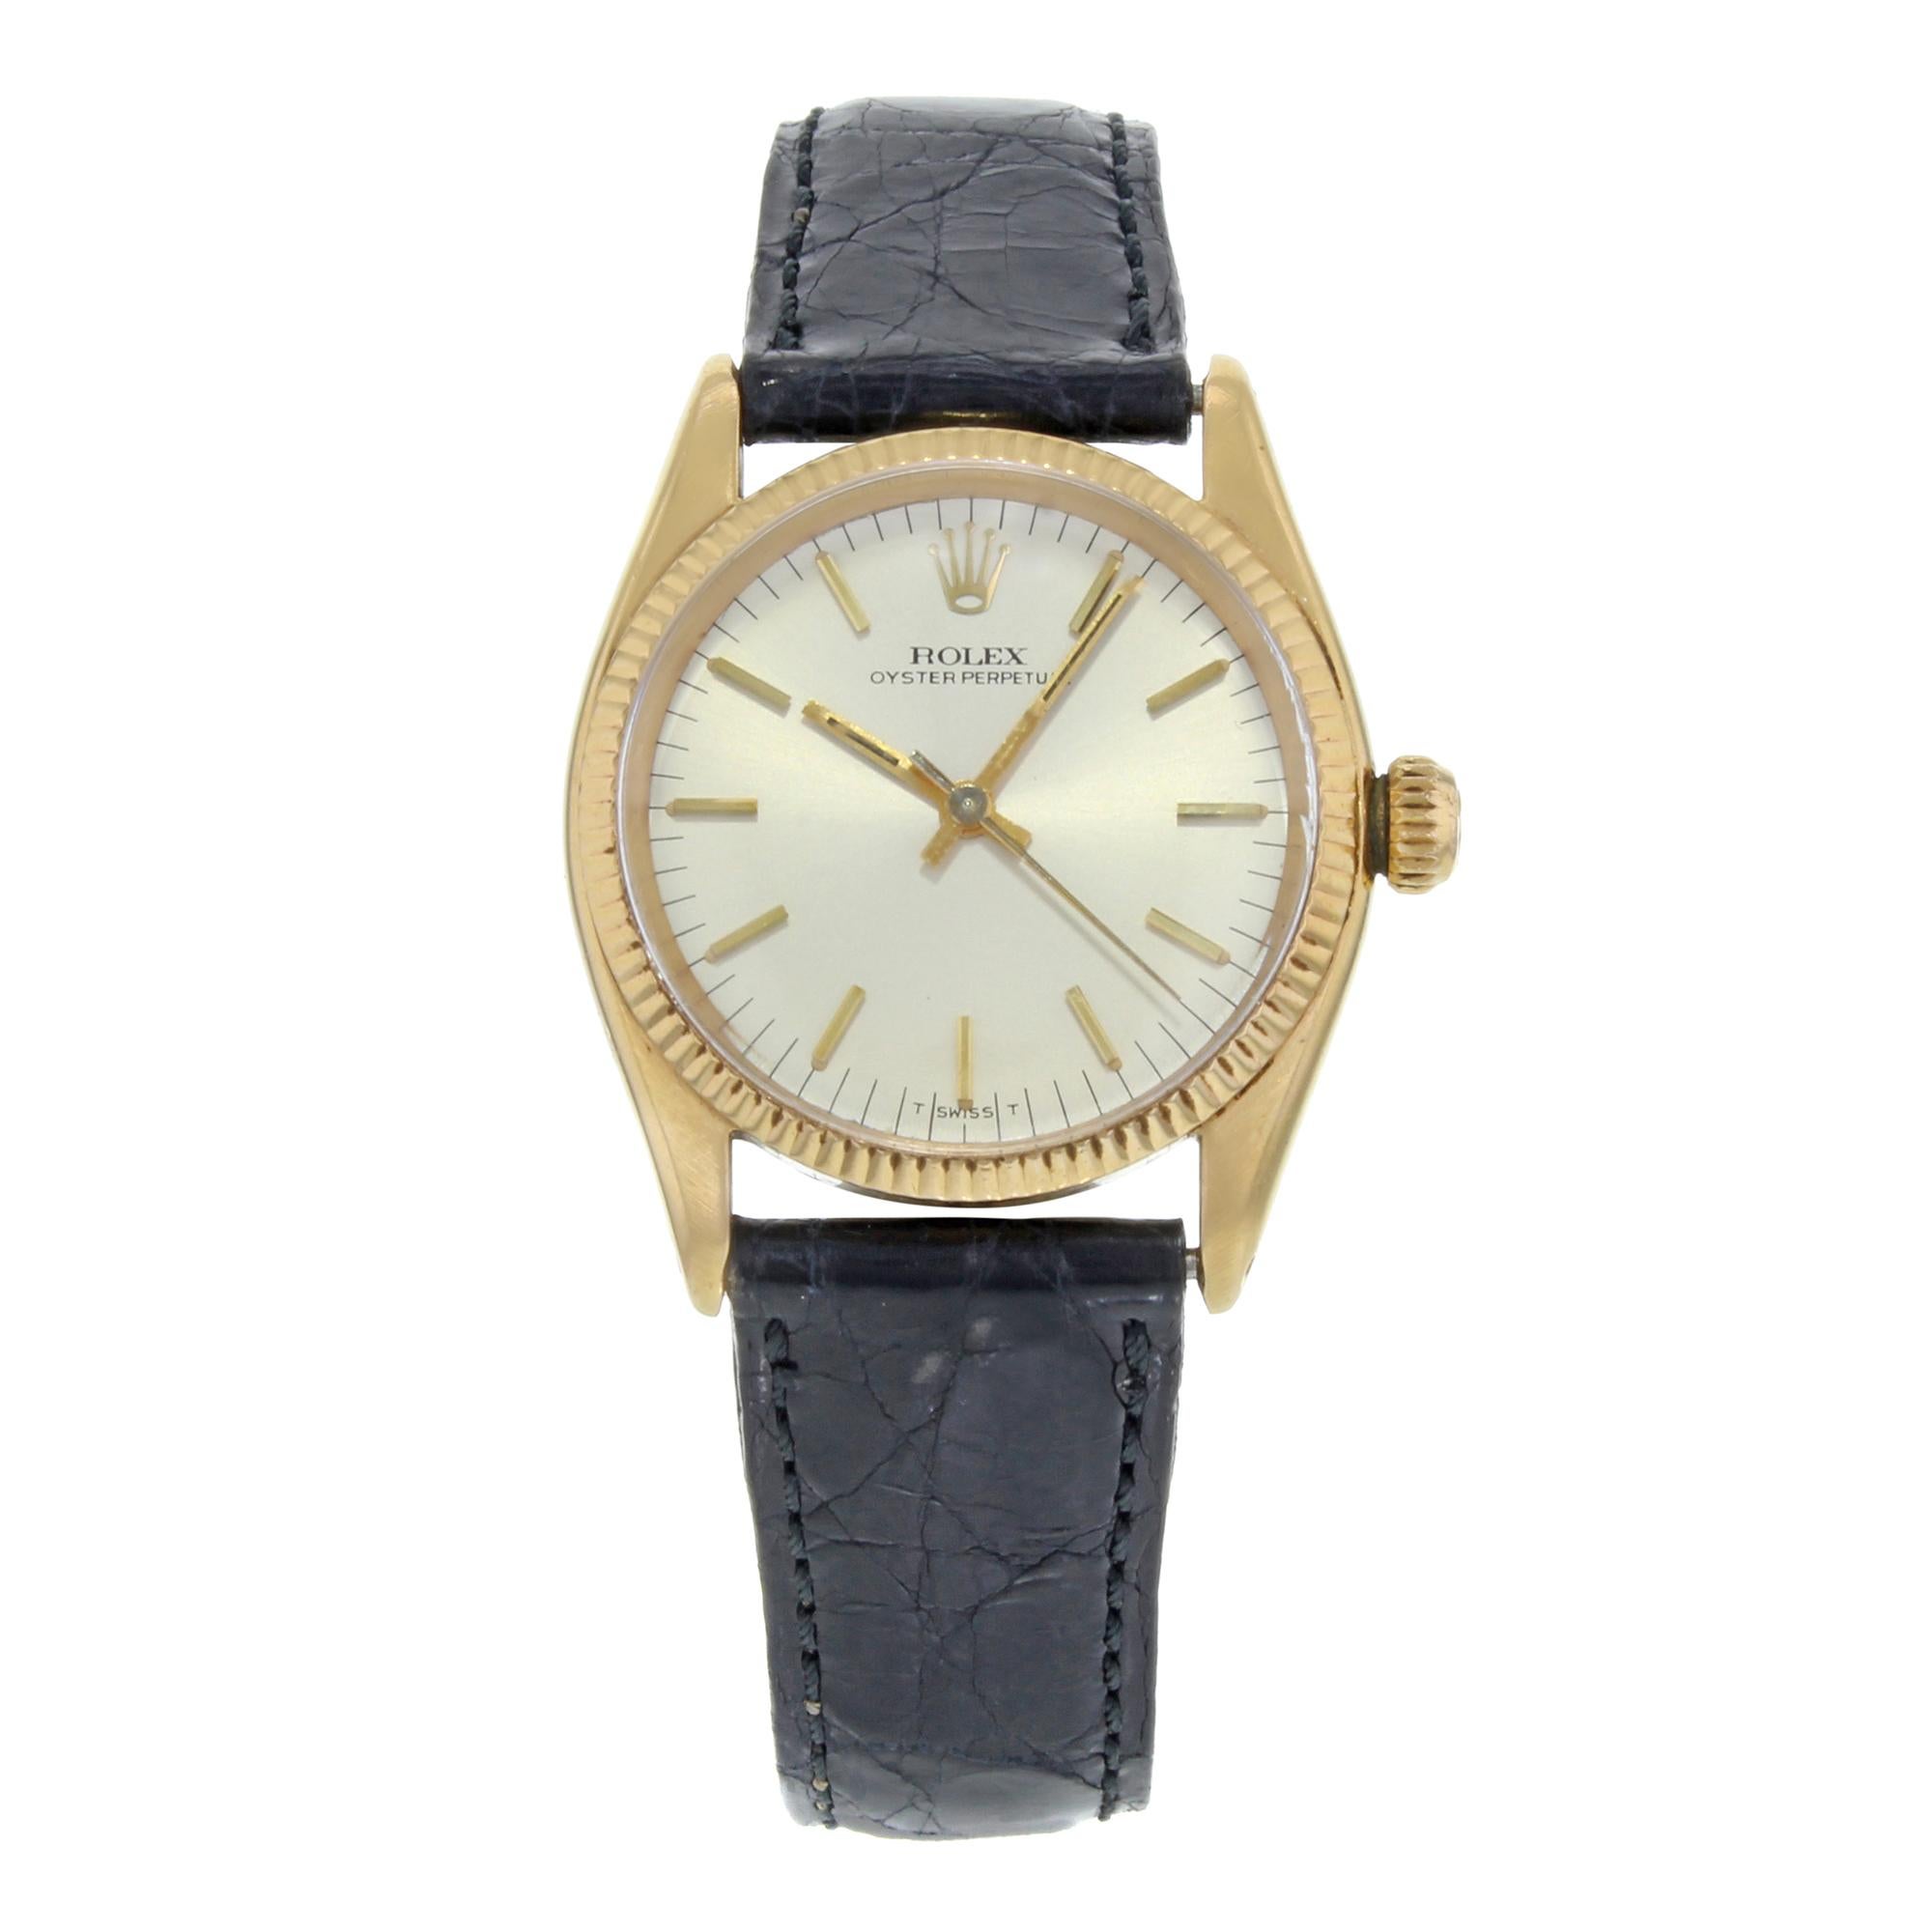 Rolex Oyster Perpetual 6551